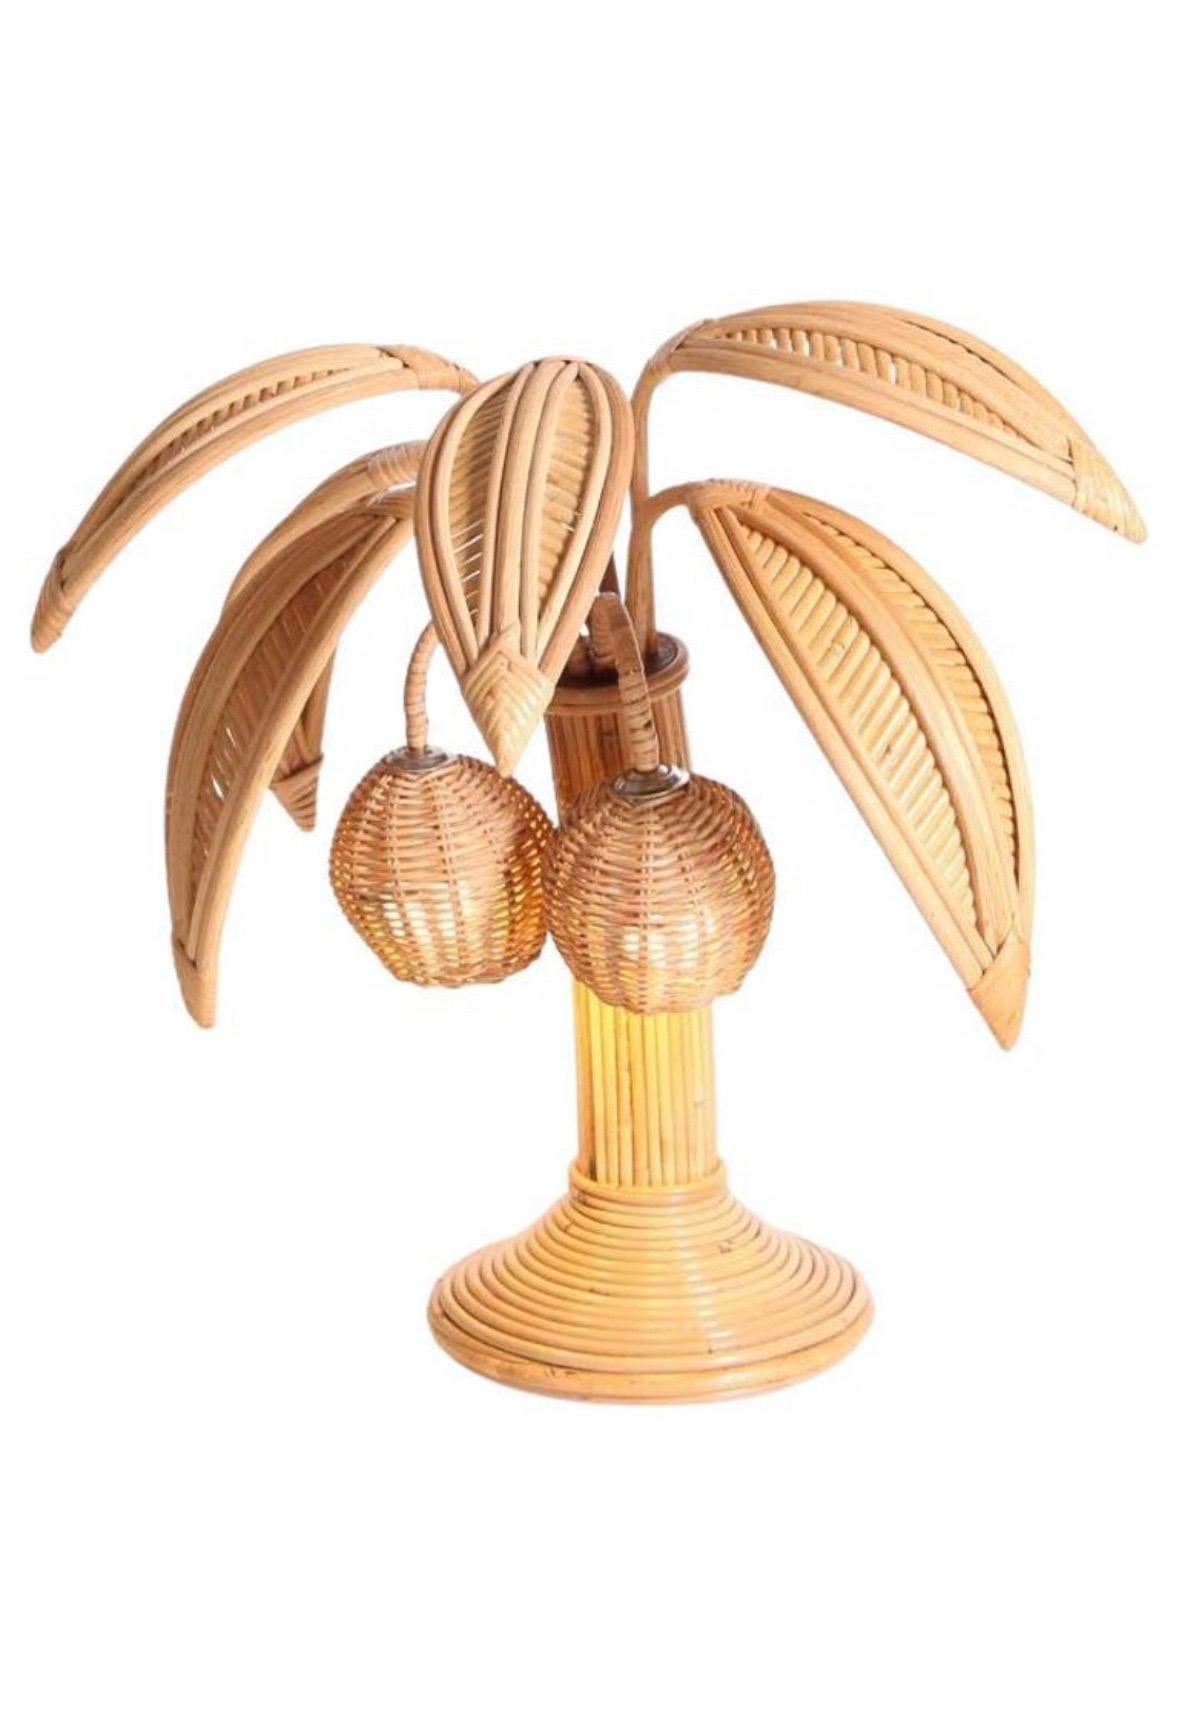 Lovely pair of rattan lamps with adjustable palms and lights in the coconuts.
Very decorative, these lamps are a promise of holidays and sun.
They are the result of a high quality work, all hand made! Excellent condition.